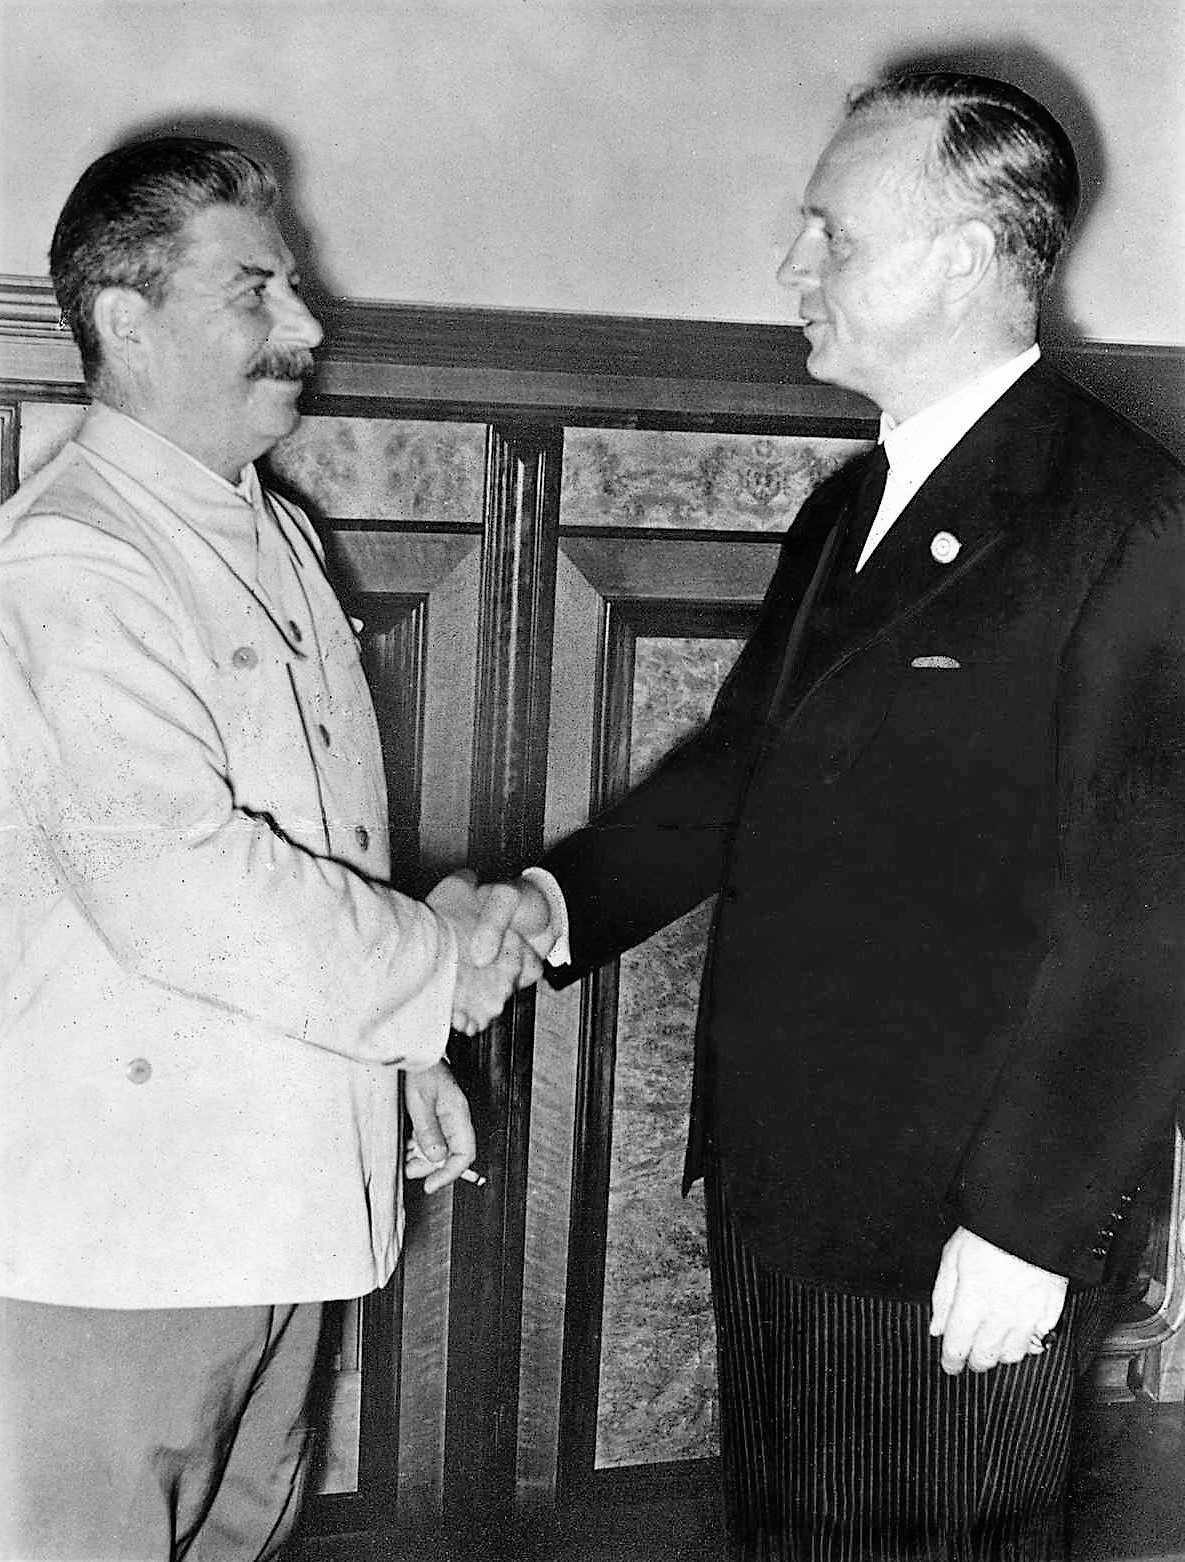 Stalin and German Foreign Minister Ribbentrop